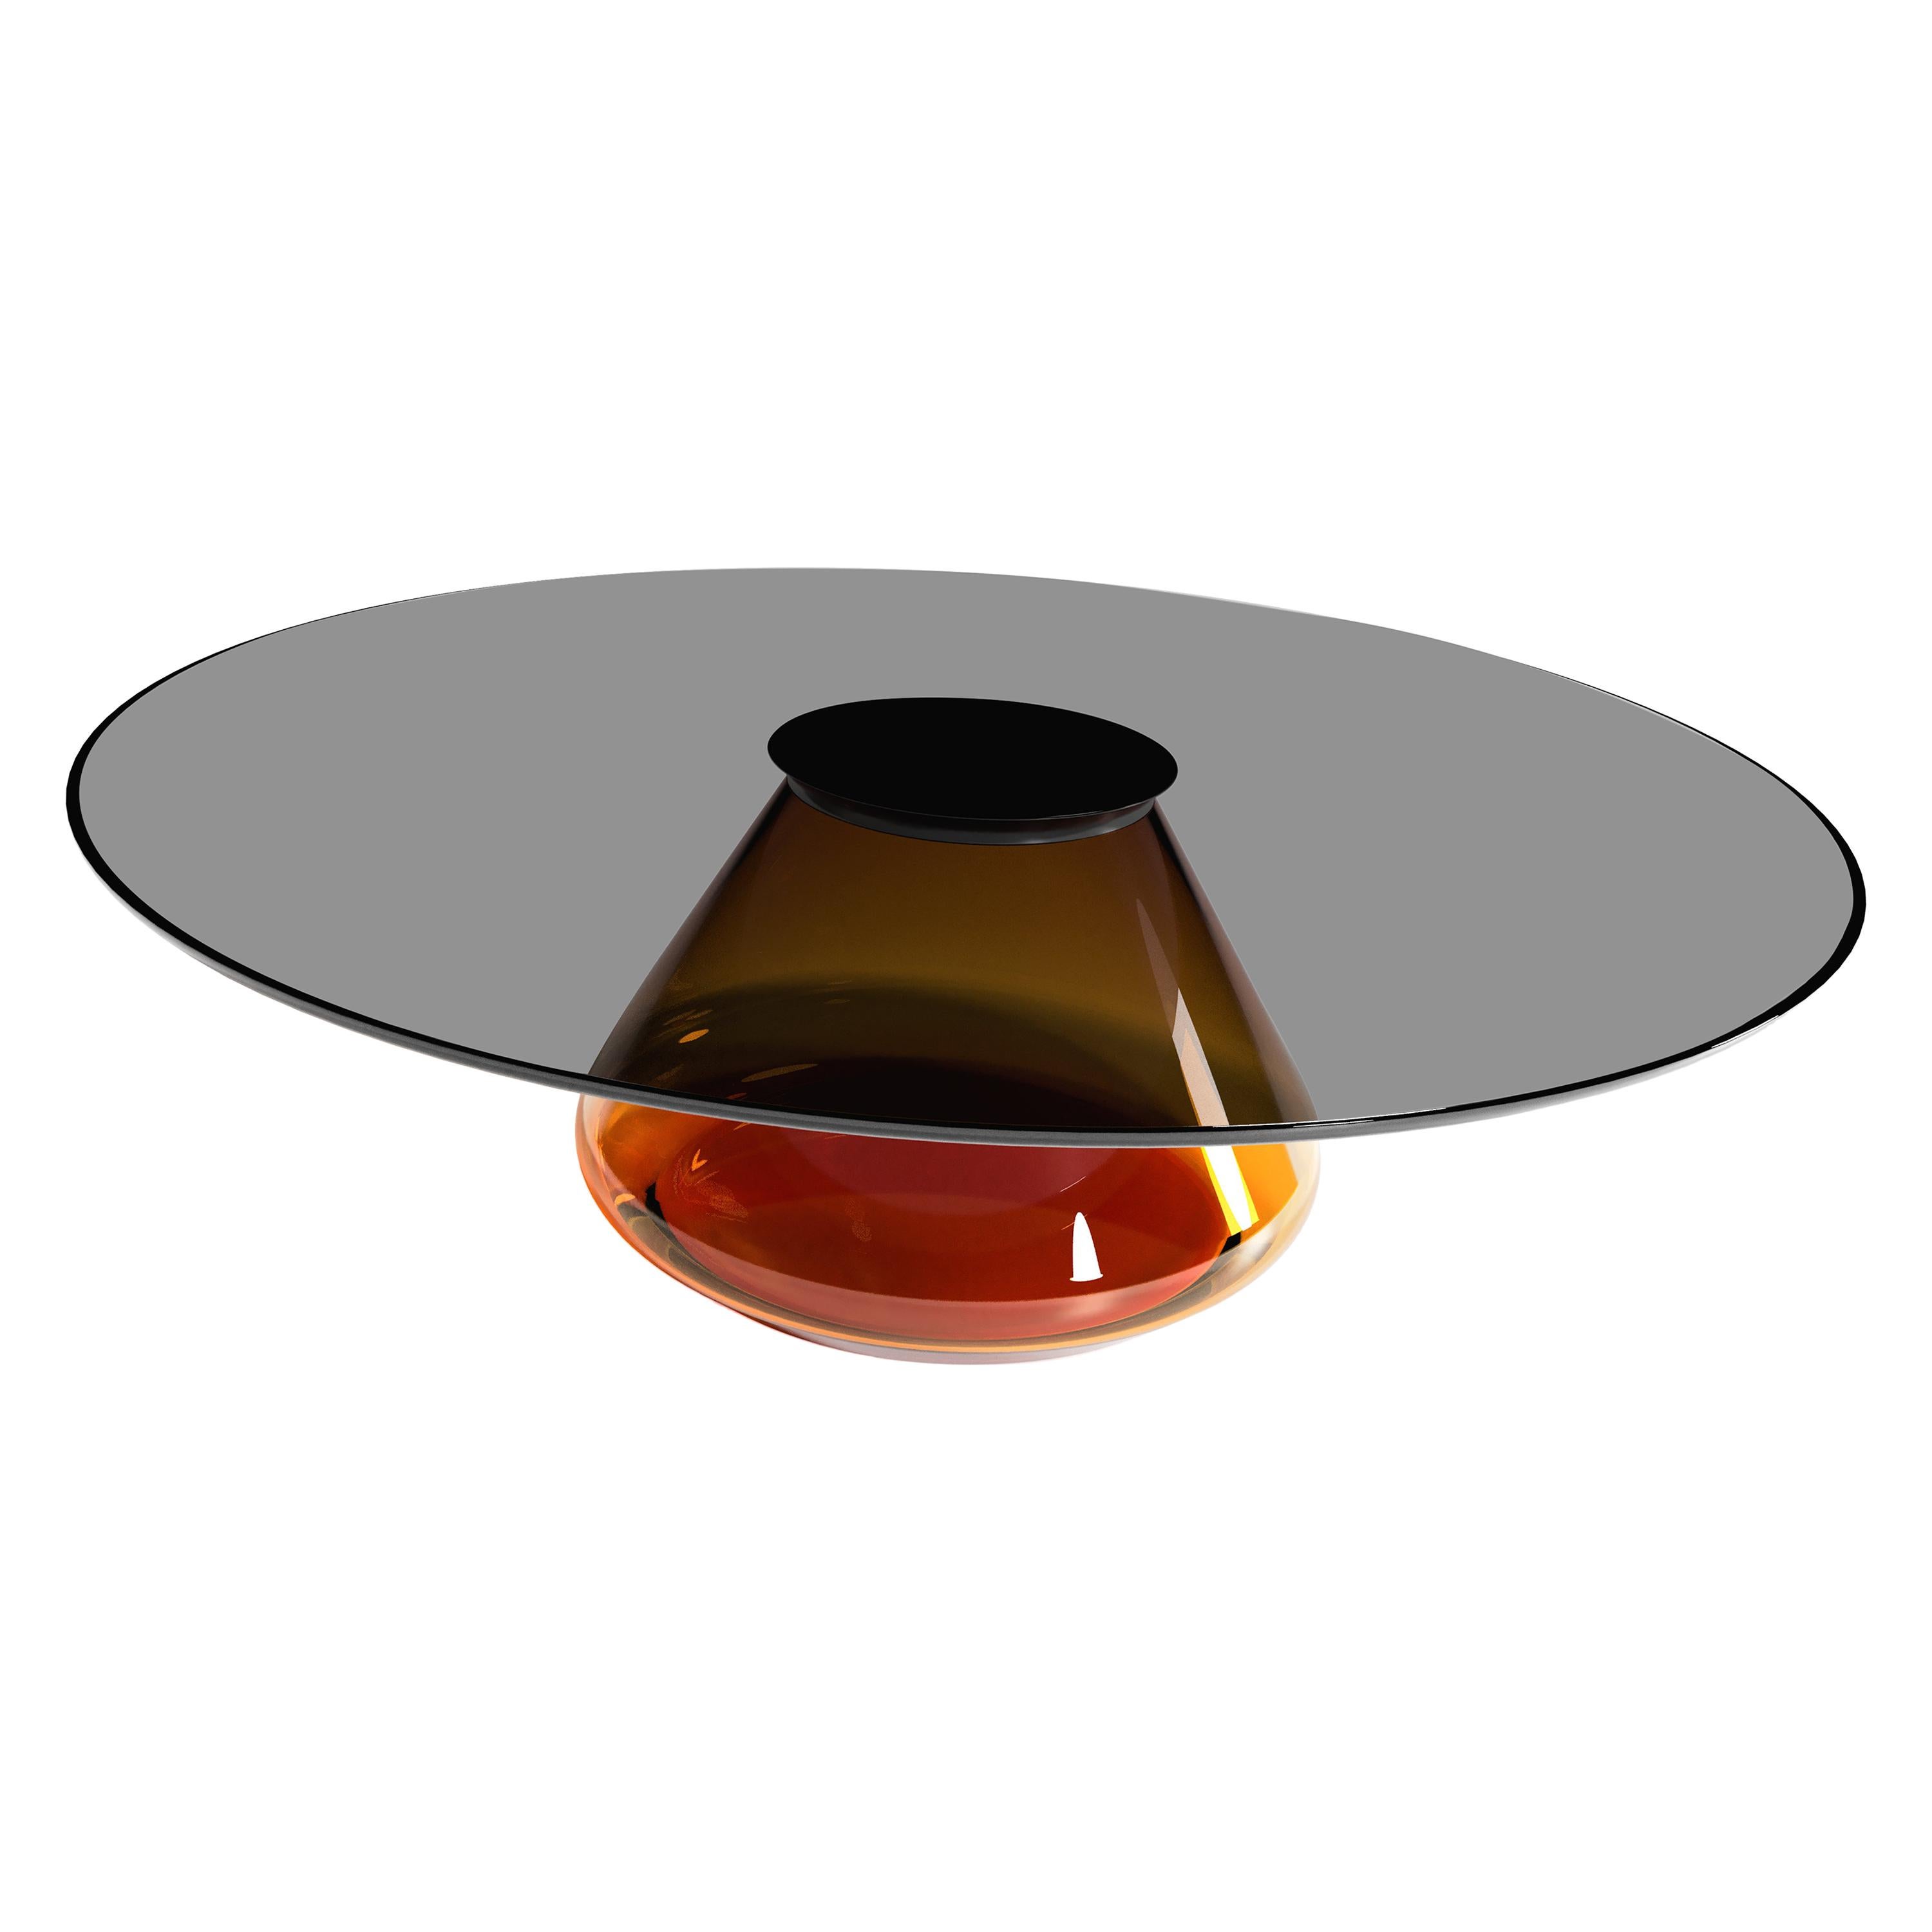 "Amber Eclipse" Contemporary Coffee Table Ft. Glass Base & Top, Grzegorz Majka